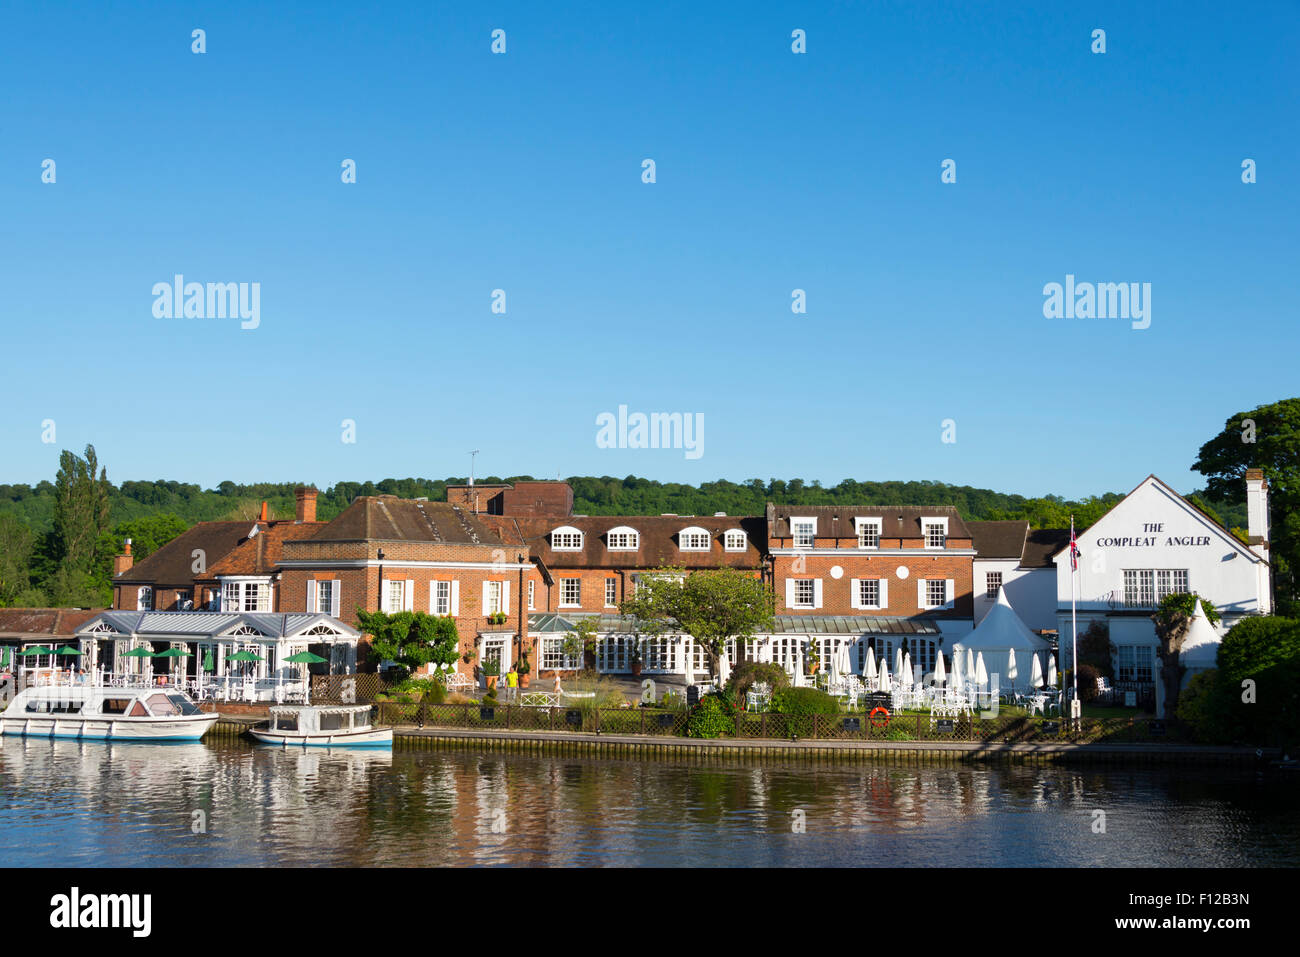 Le Compleat Angler, Marlow, Buckinghamshire, Angleterre, Royaume-Uni. Banque D'Images